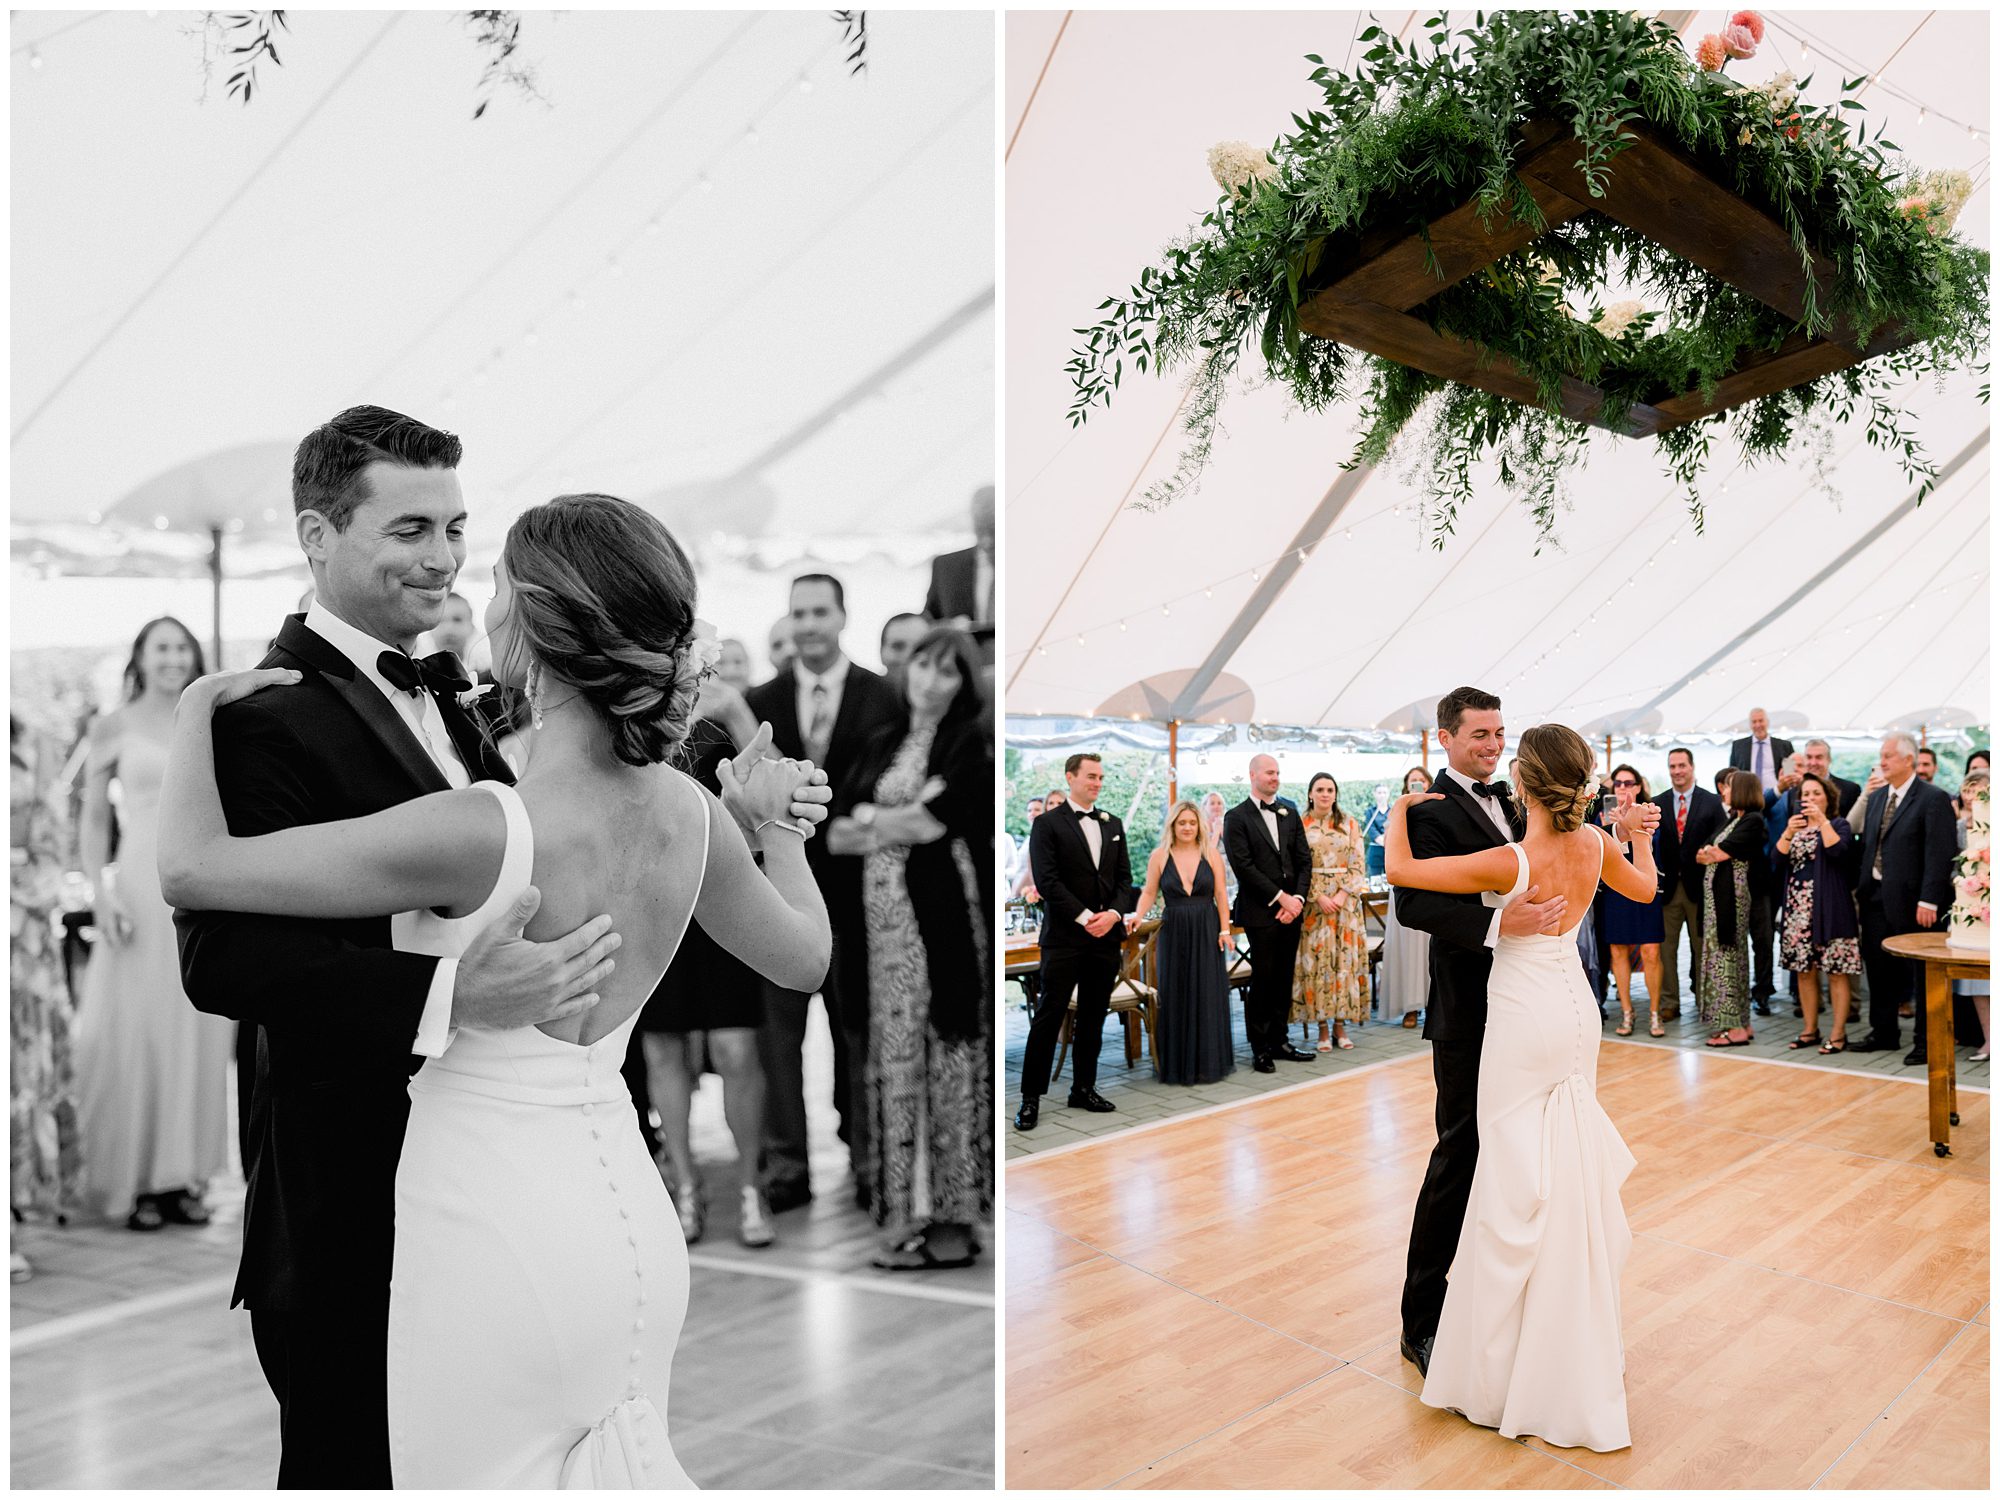 First Dance at Wentworth country Club Wedding